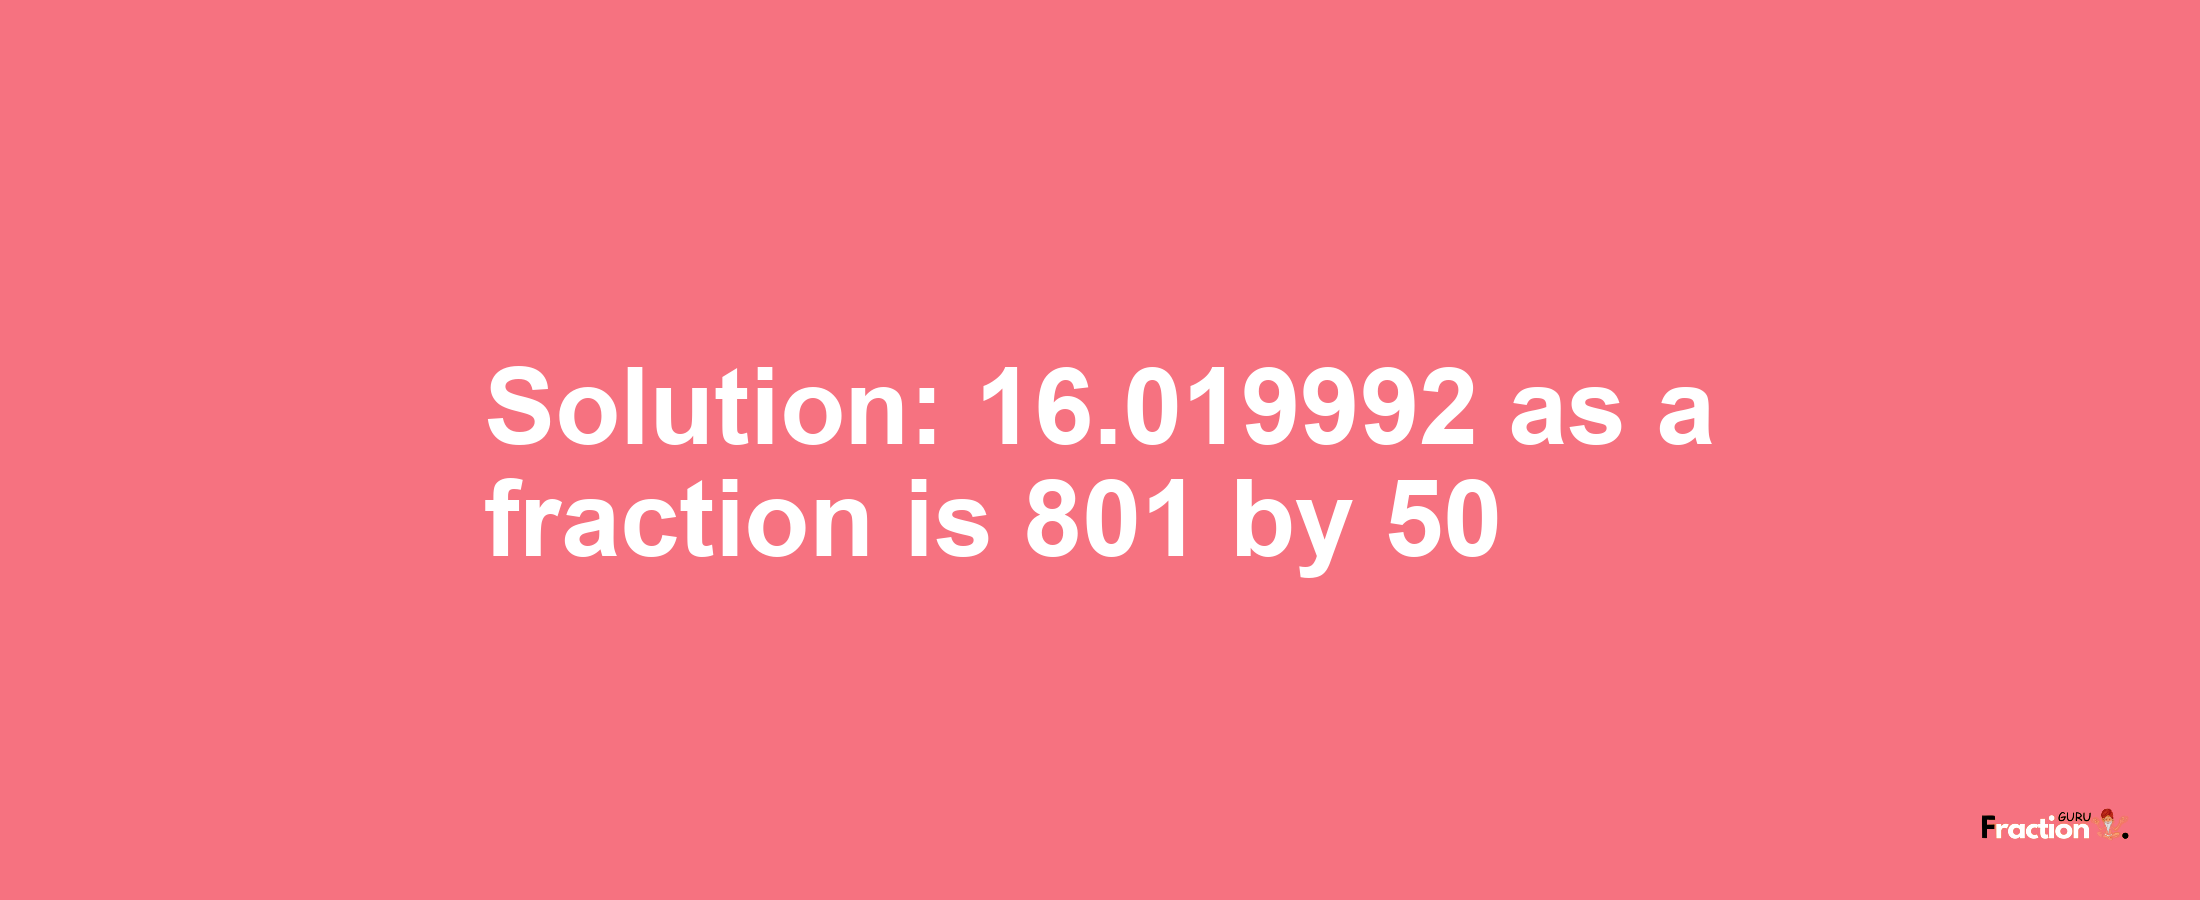 Solution:16.019992 as a fraction is 801/50